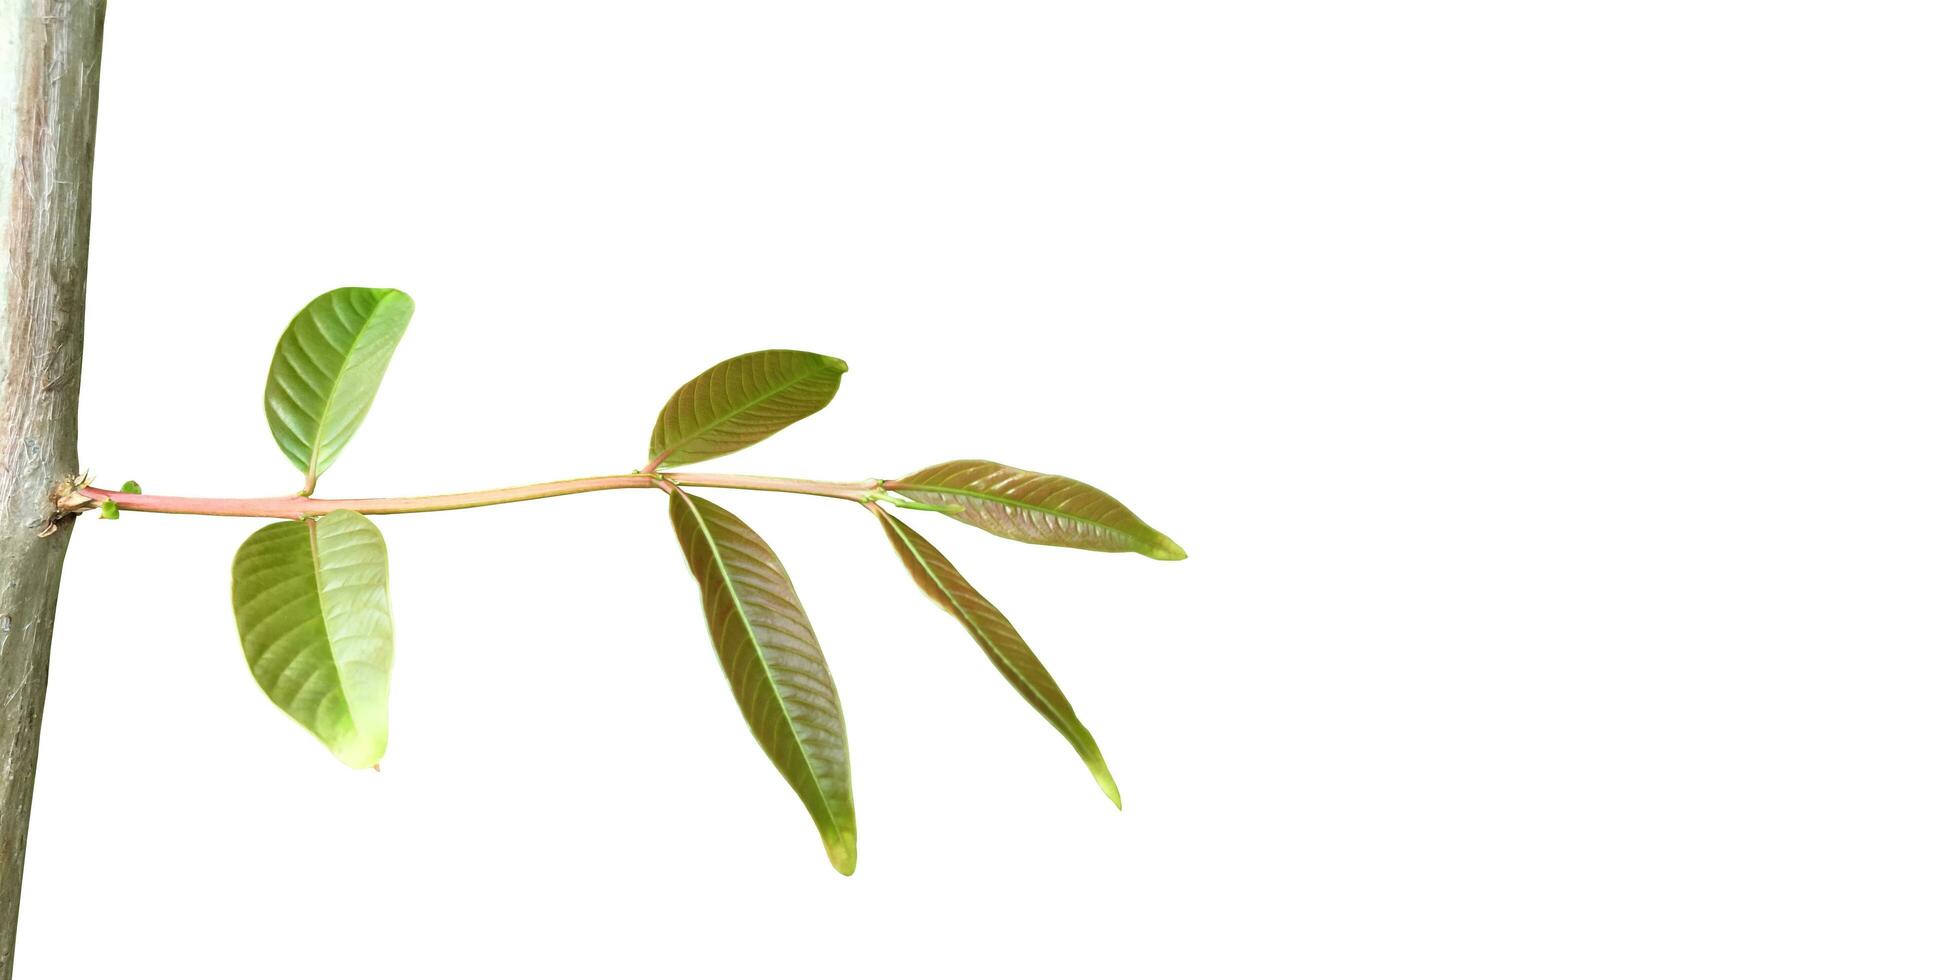 Crape myrtle leaf isolated on white background with clipping paths. photo